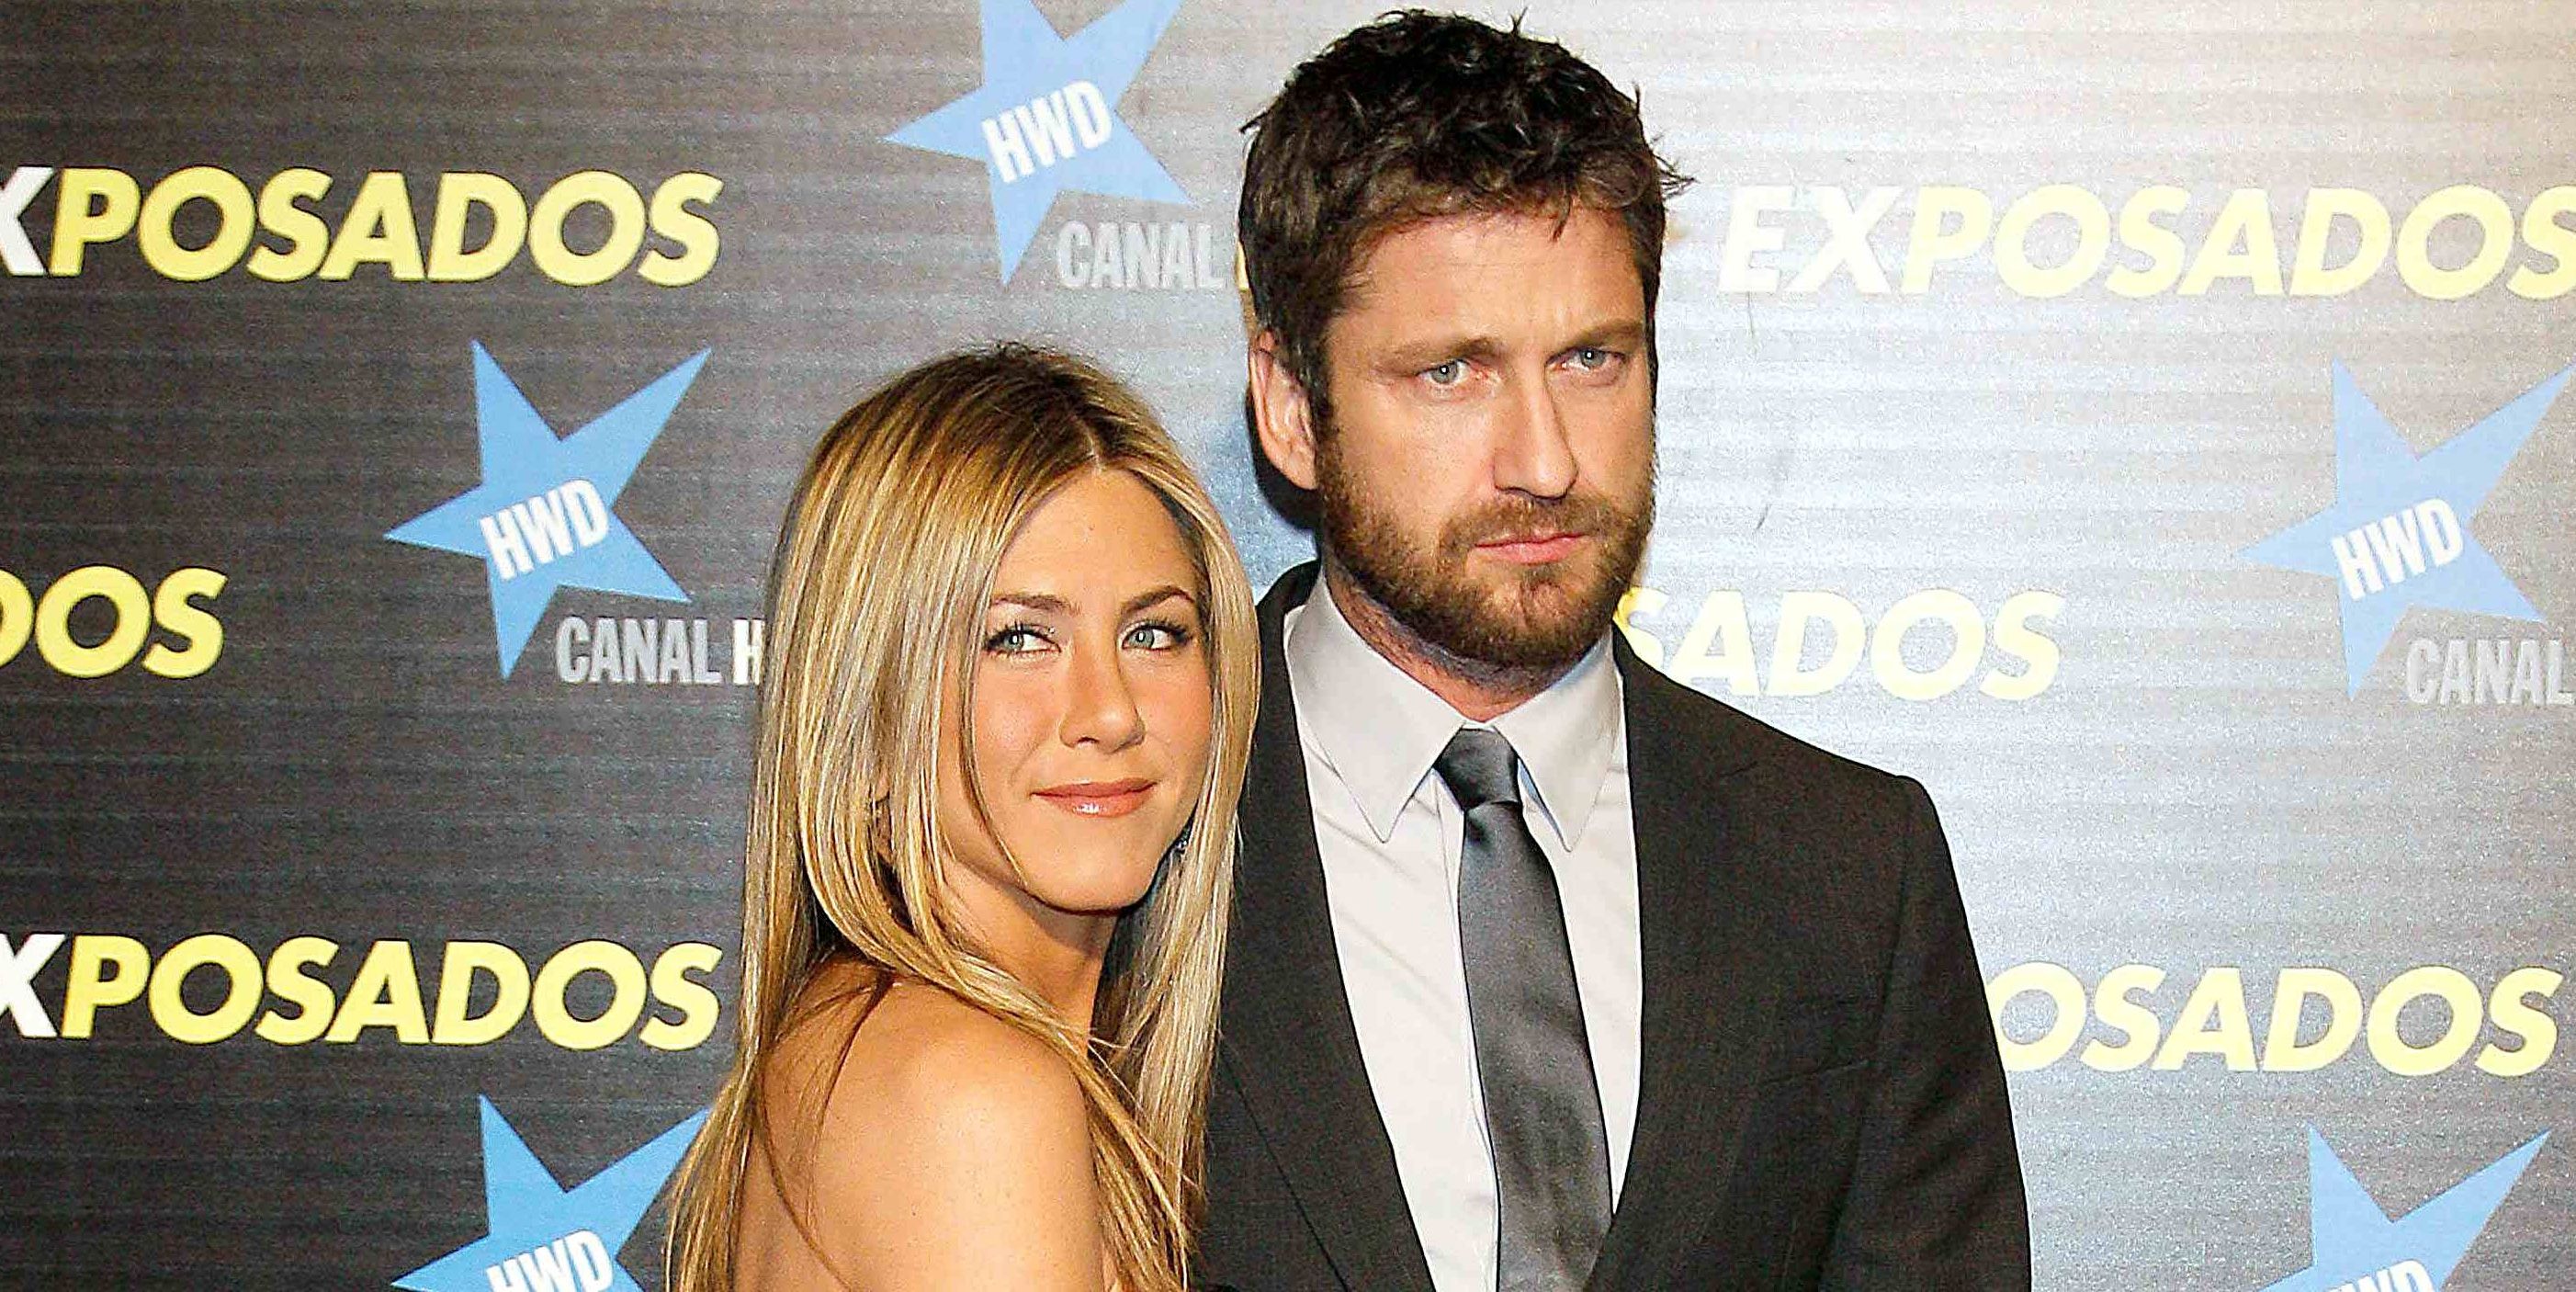 Jennifer Aniston & Gerard Butler Attended One Of The NXIVM Cult's Seminars Together